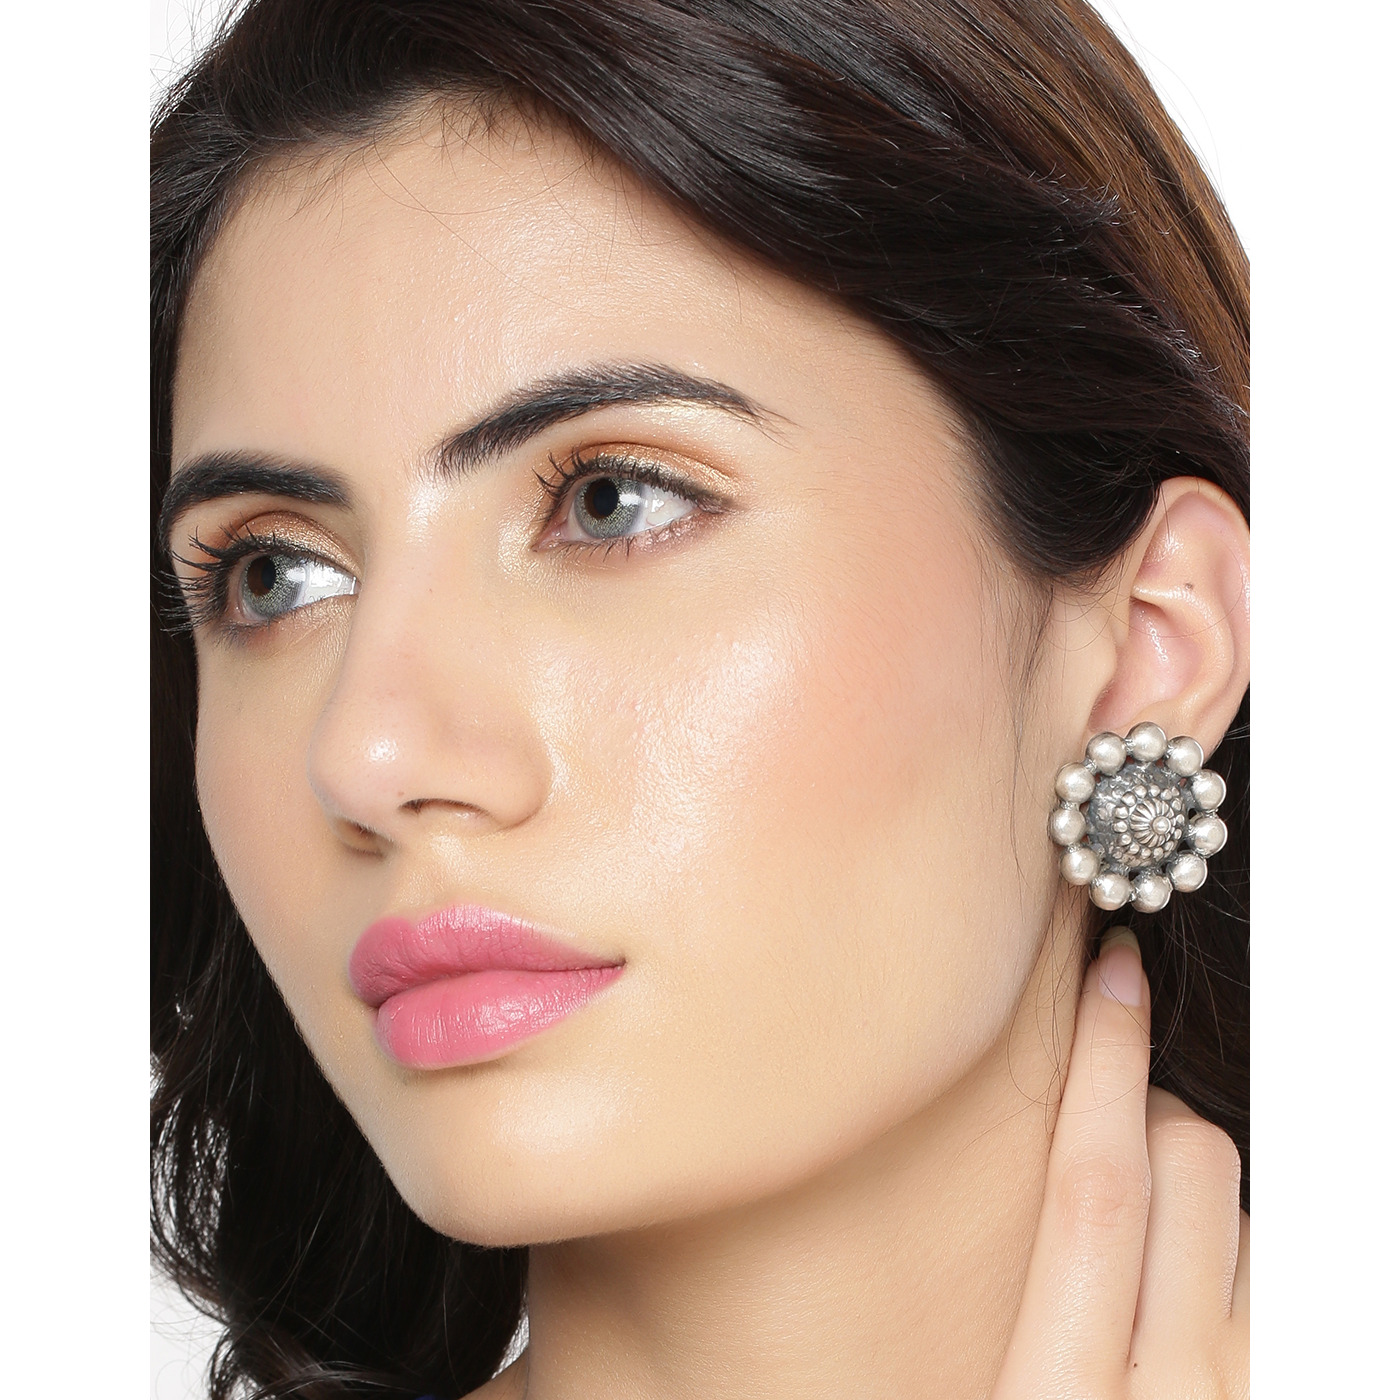 Classic & Silver Detailing Silver Studs Earrings By Silvermerc Designs